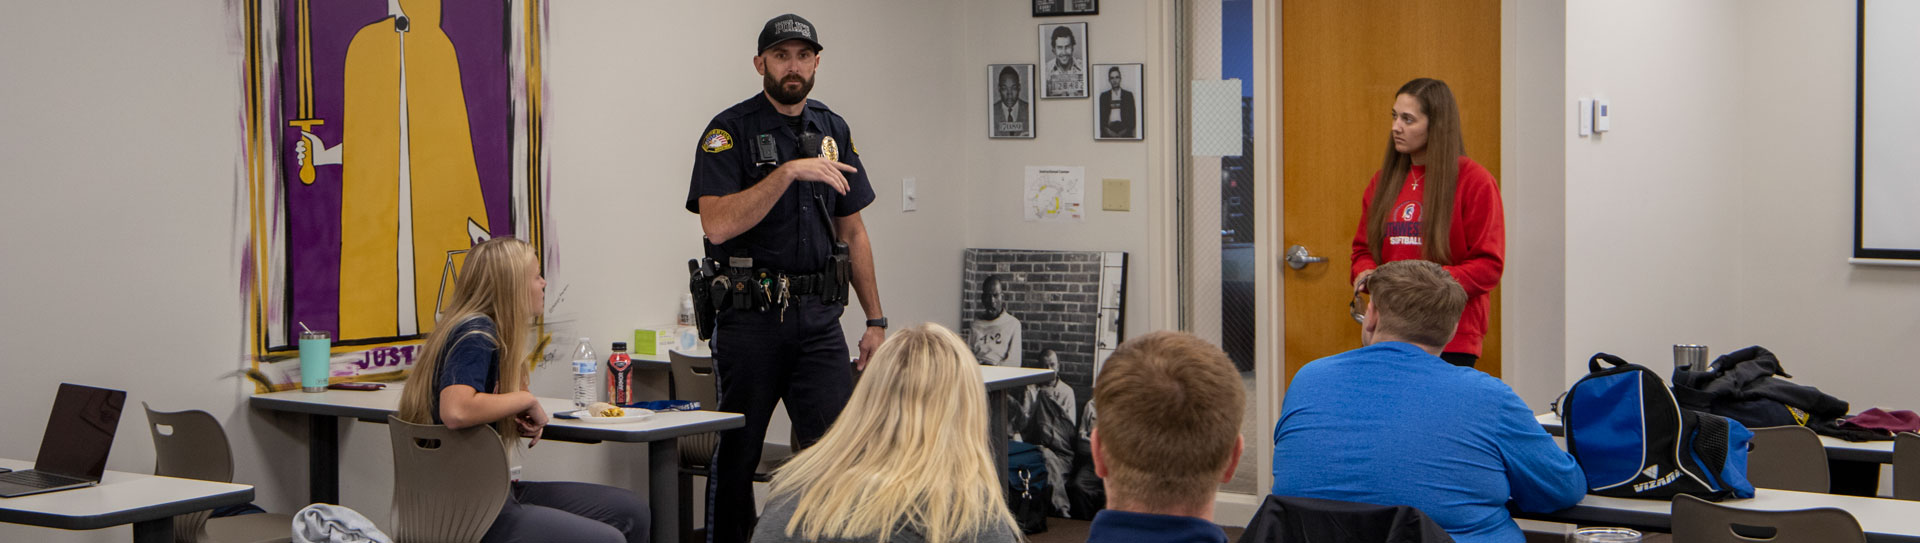 Police officer speaking to criminal justice class